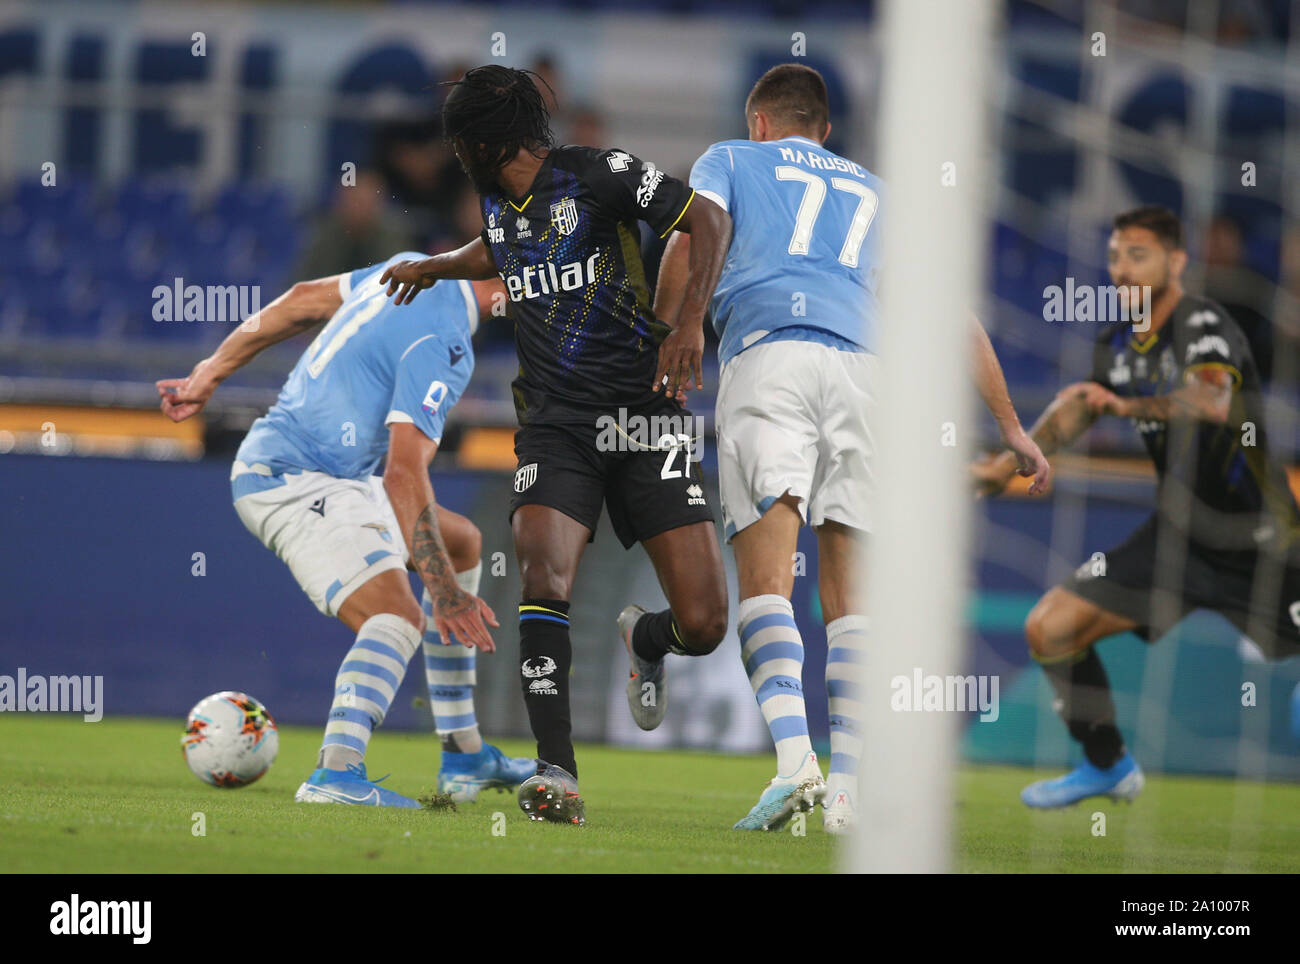 Rome, Italy. 22nd Sep, 2019. Rome, Italy - September 22, 2019:Gervinho (parma) in action during the Italian Serie A soccer match between SS LAZIO and PARMA, at Olympic Stadium in Rome. Credit: Independent Photo Agency/Alamy Live News Stock Photo